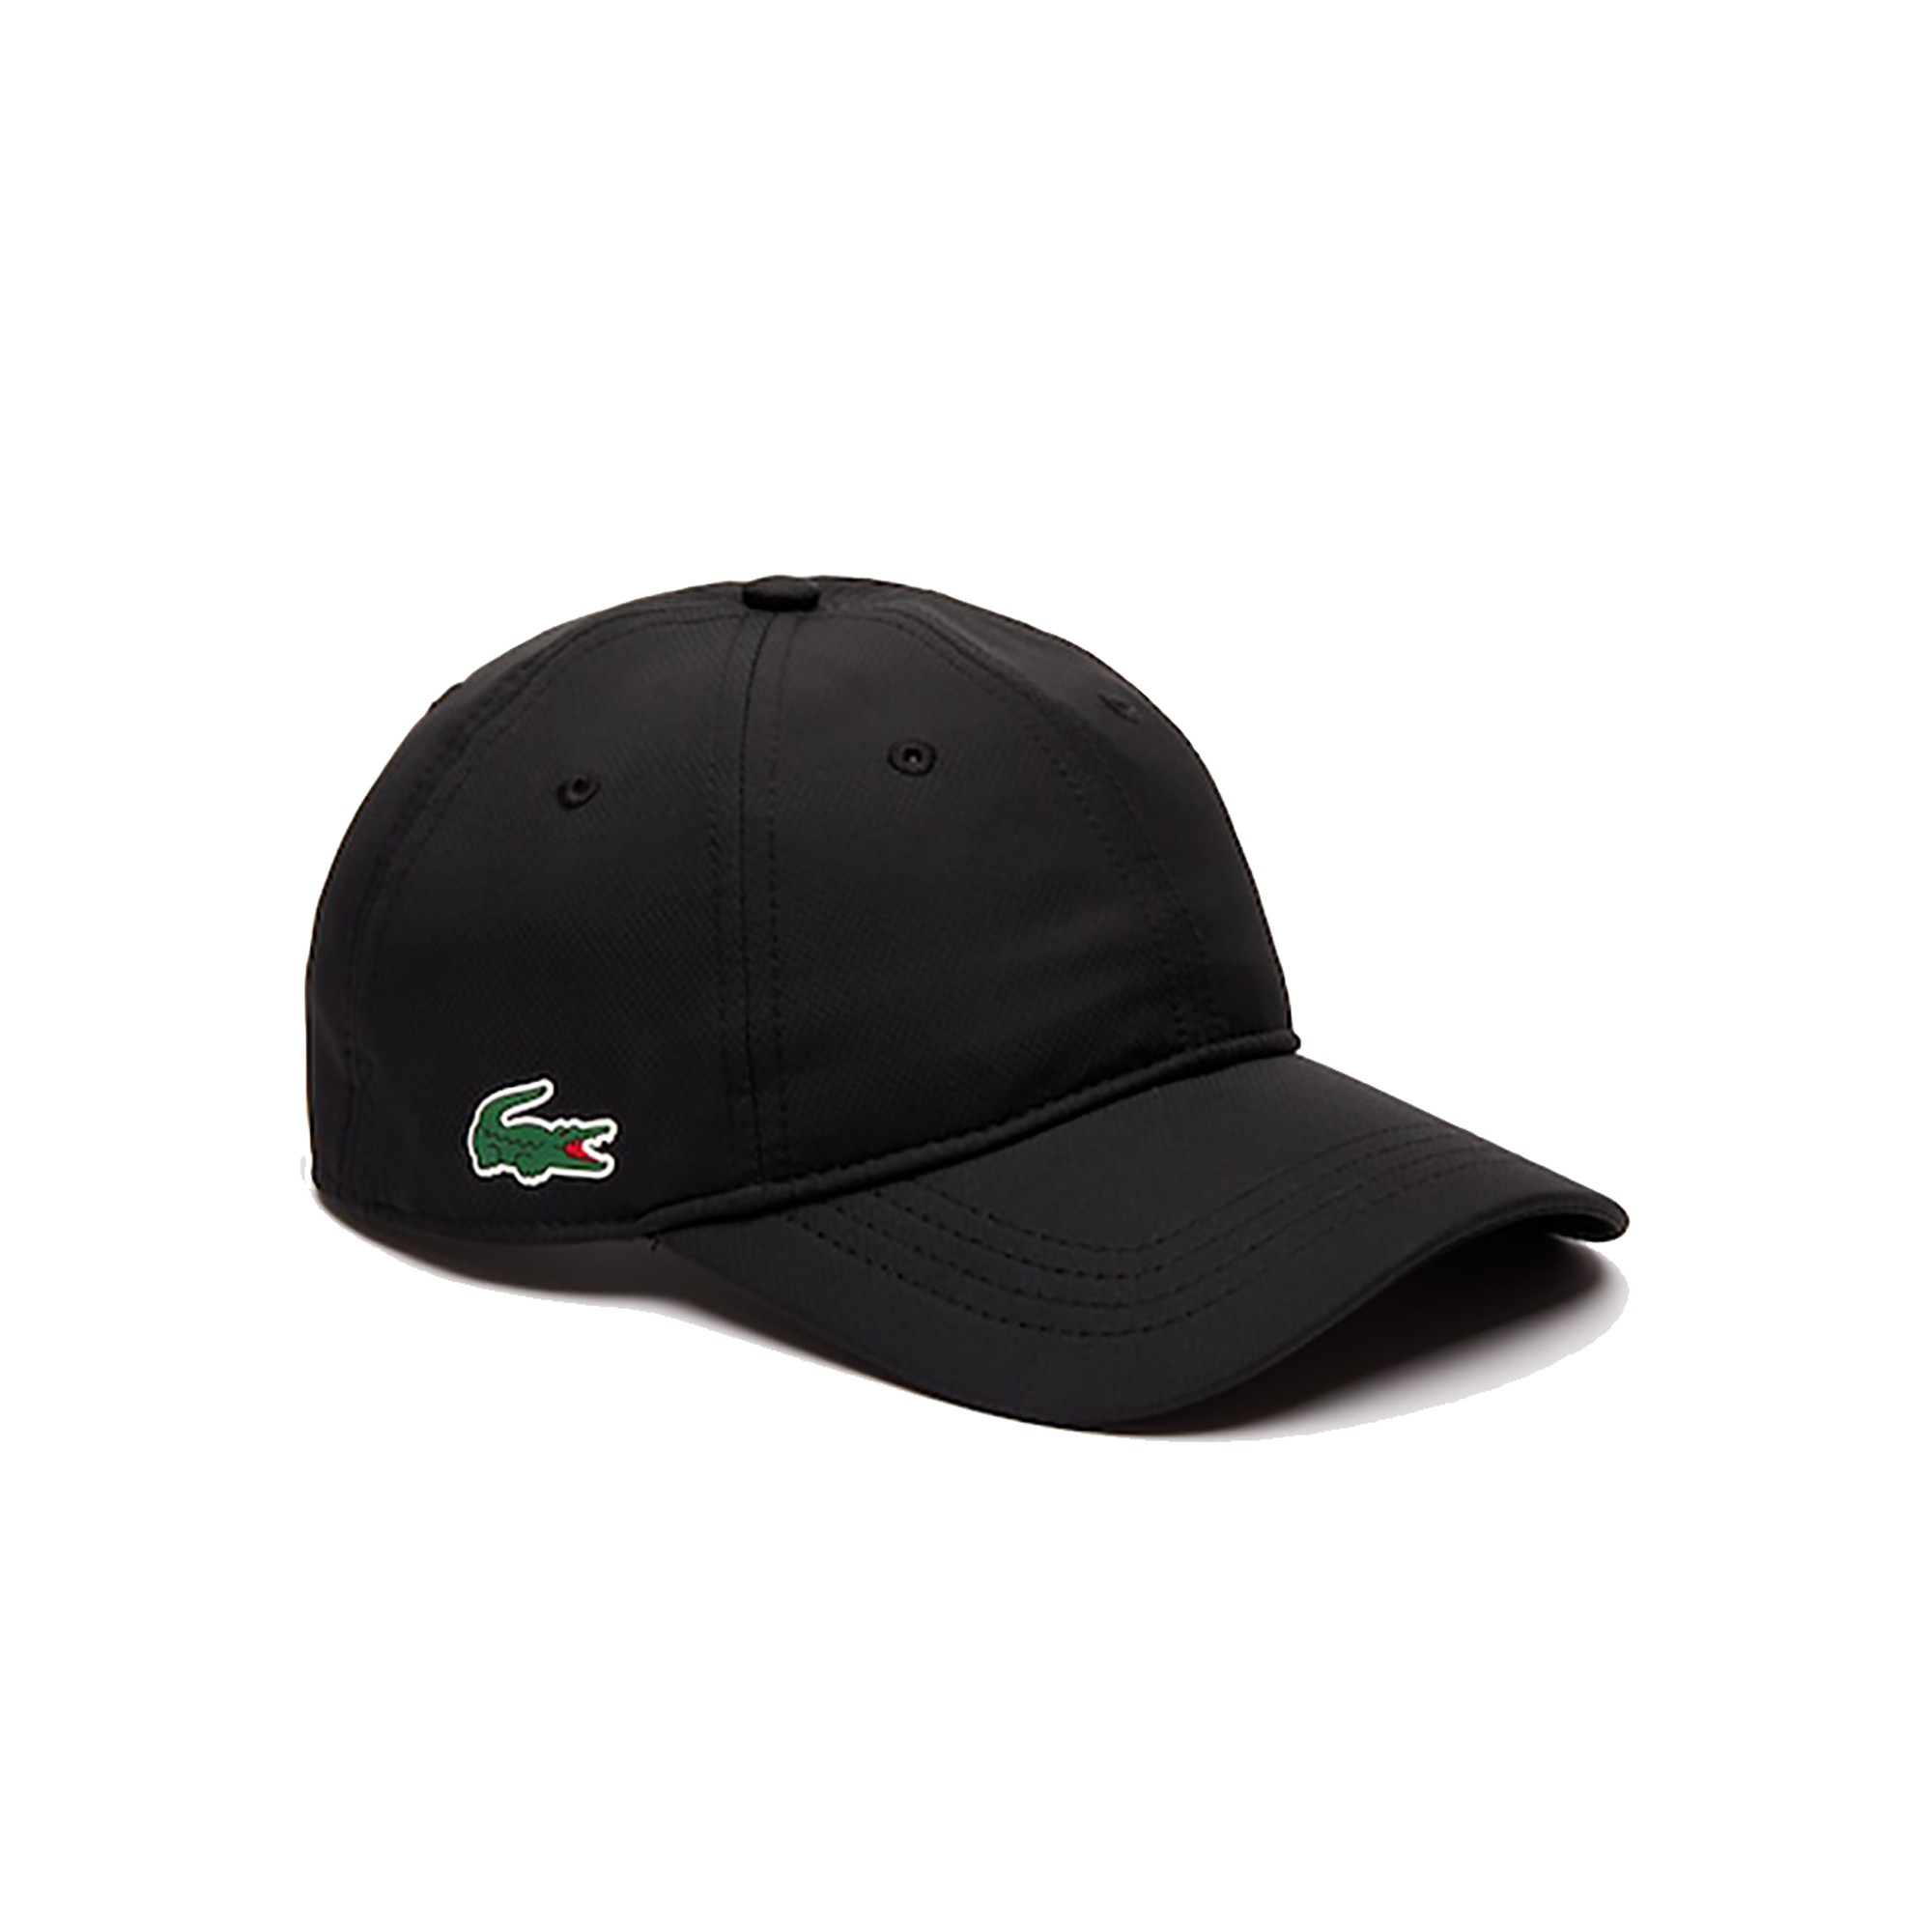 LACOSTE Caps and visors RK2447 031